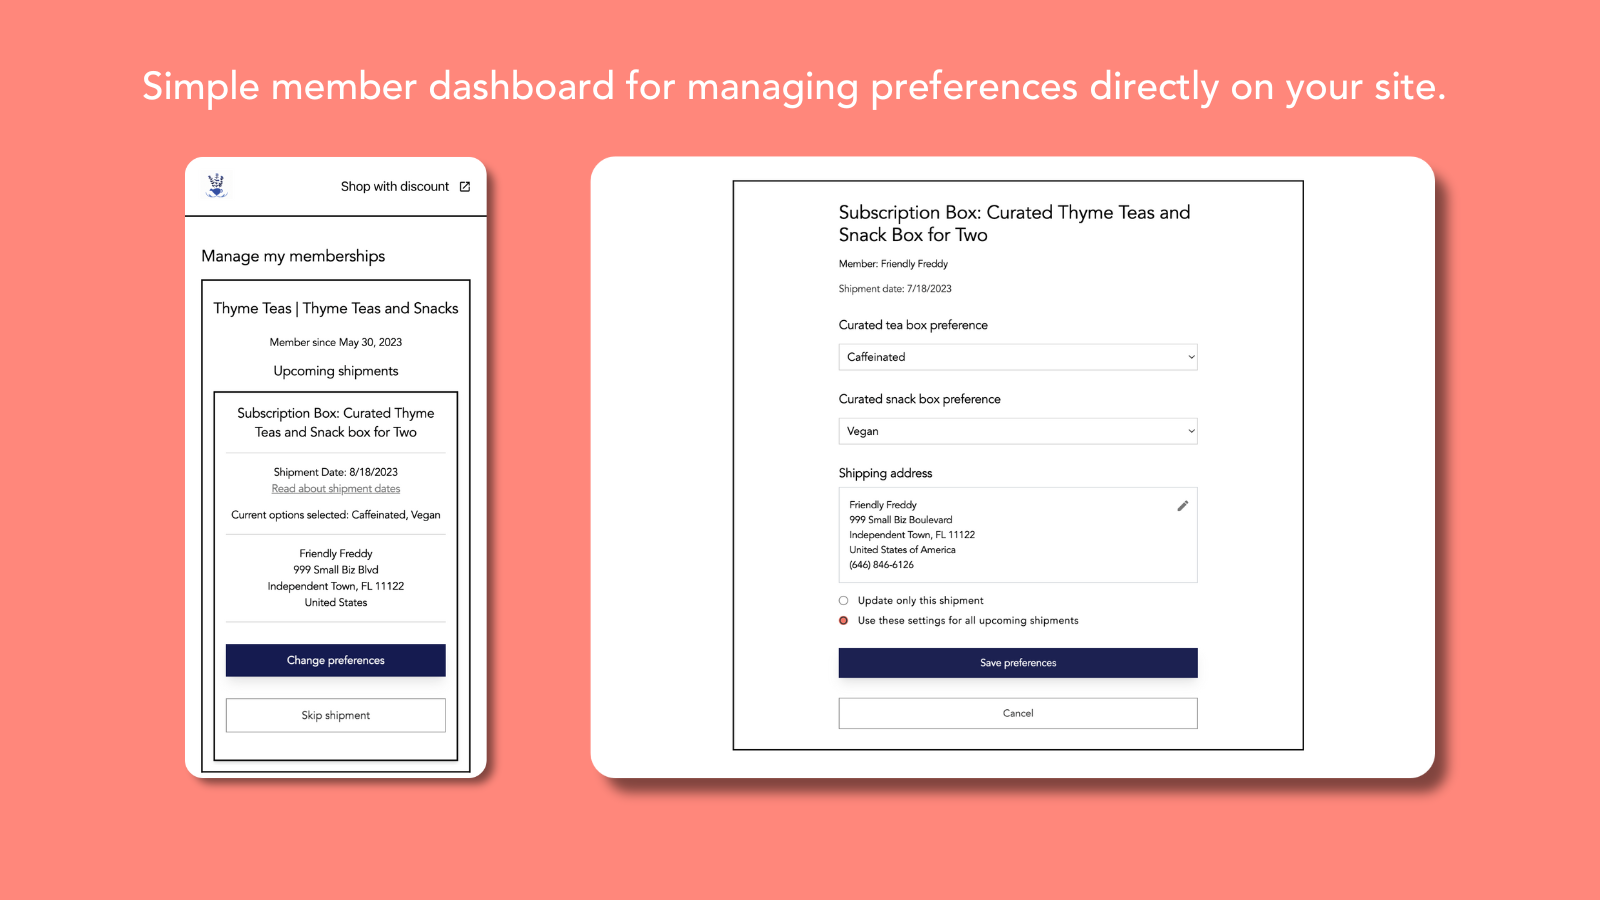 Simple member dashboard for managing preferences in your store.